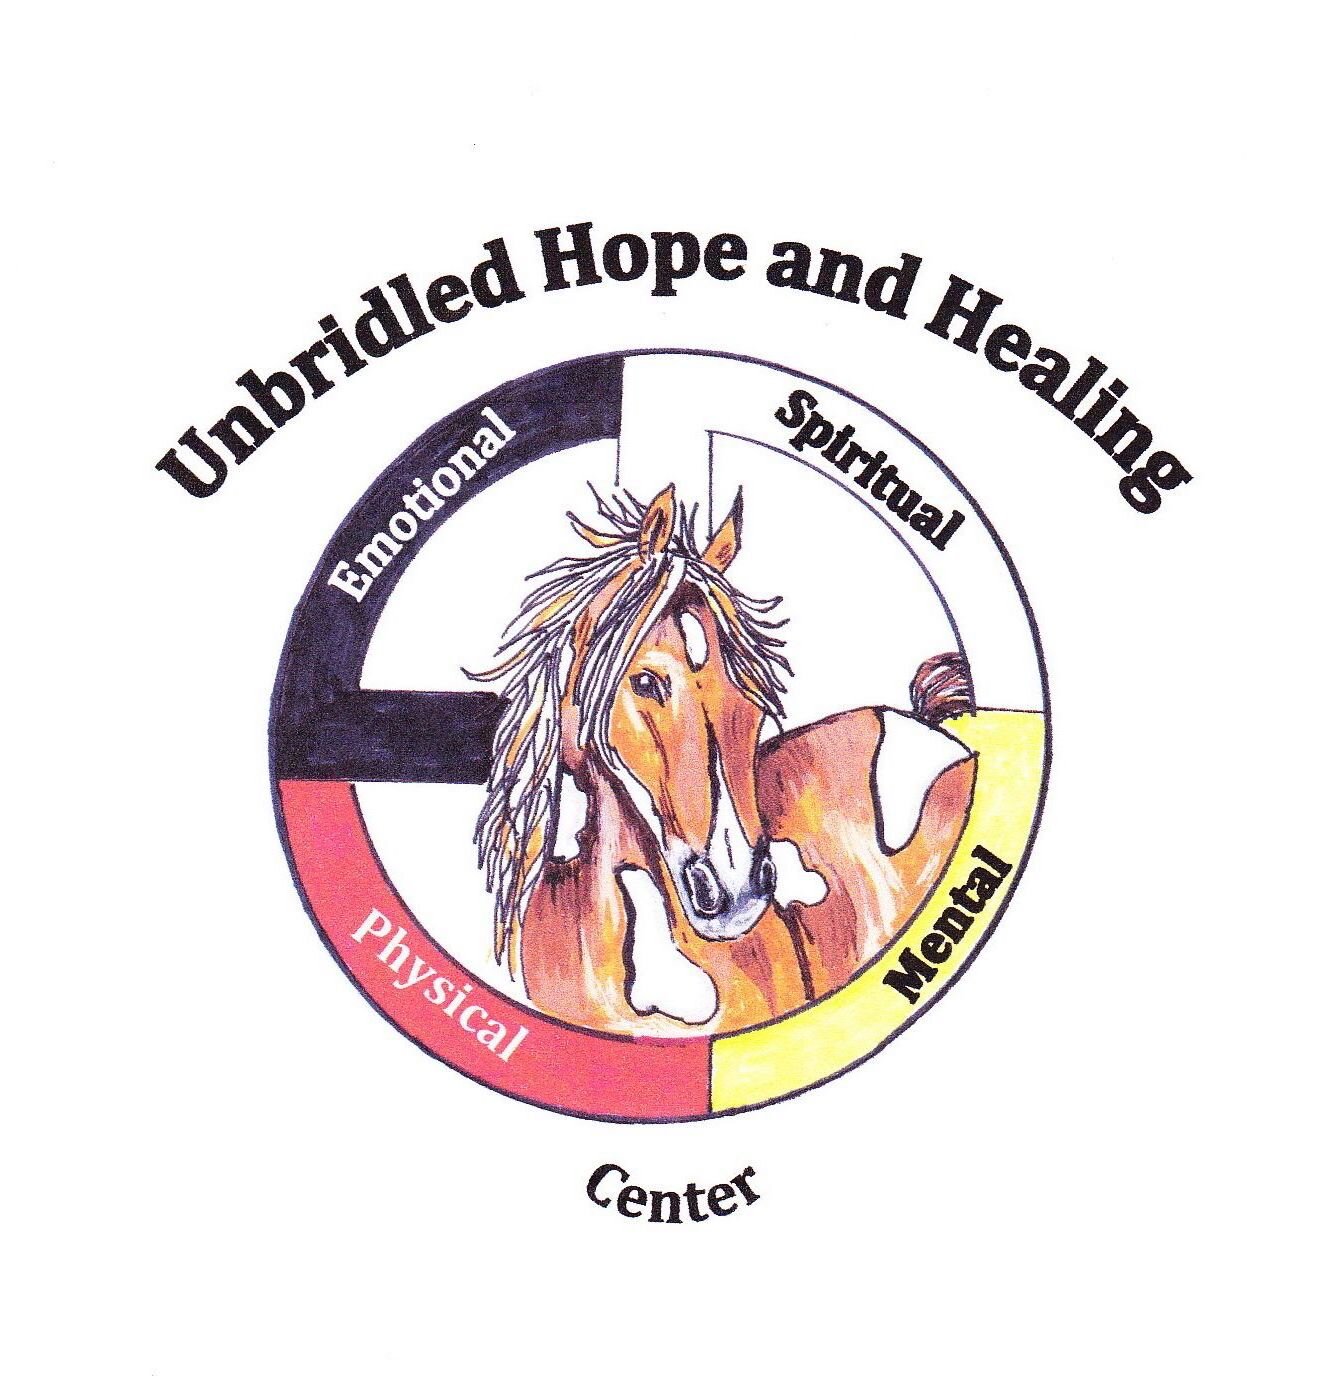 Unbridled Hope and Healing